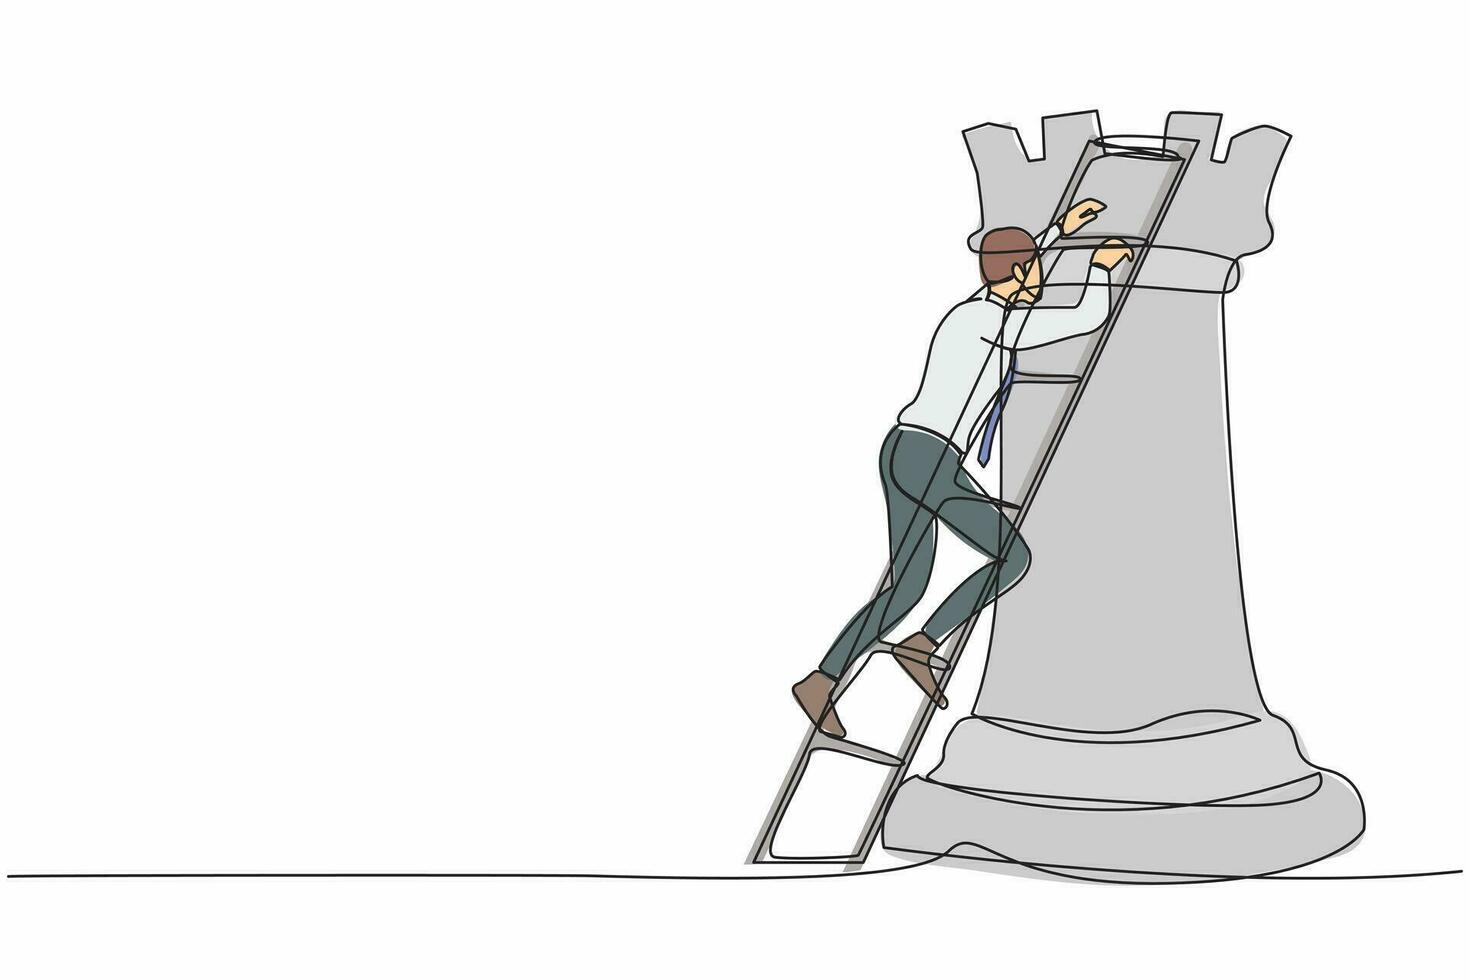 Continuous one line drawing active businessman climb huge rook chess piece with ladder. Company strategy success using powerful move for advantage. Single line draw design vector graphic illustration